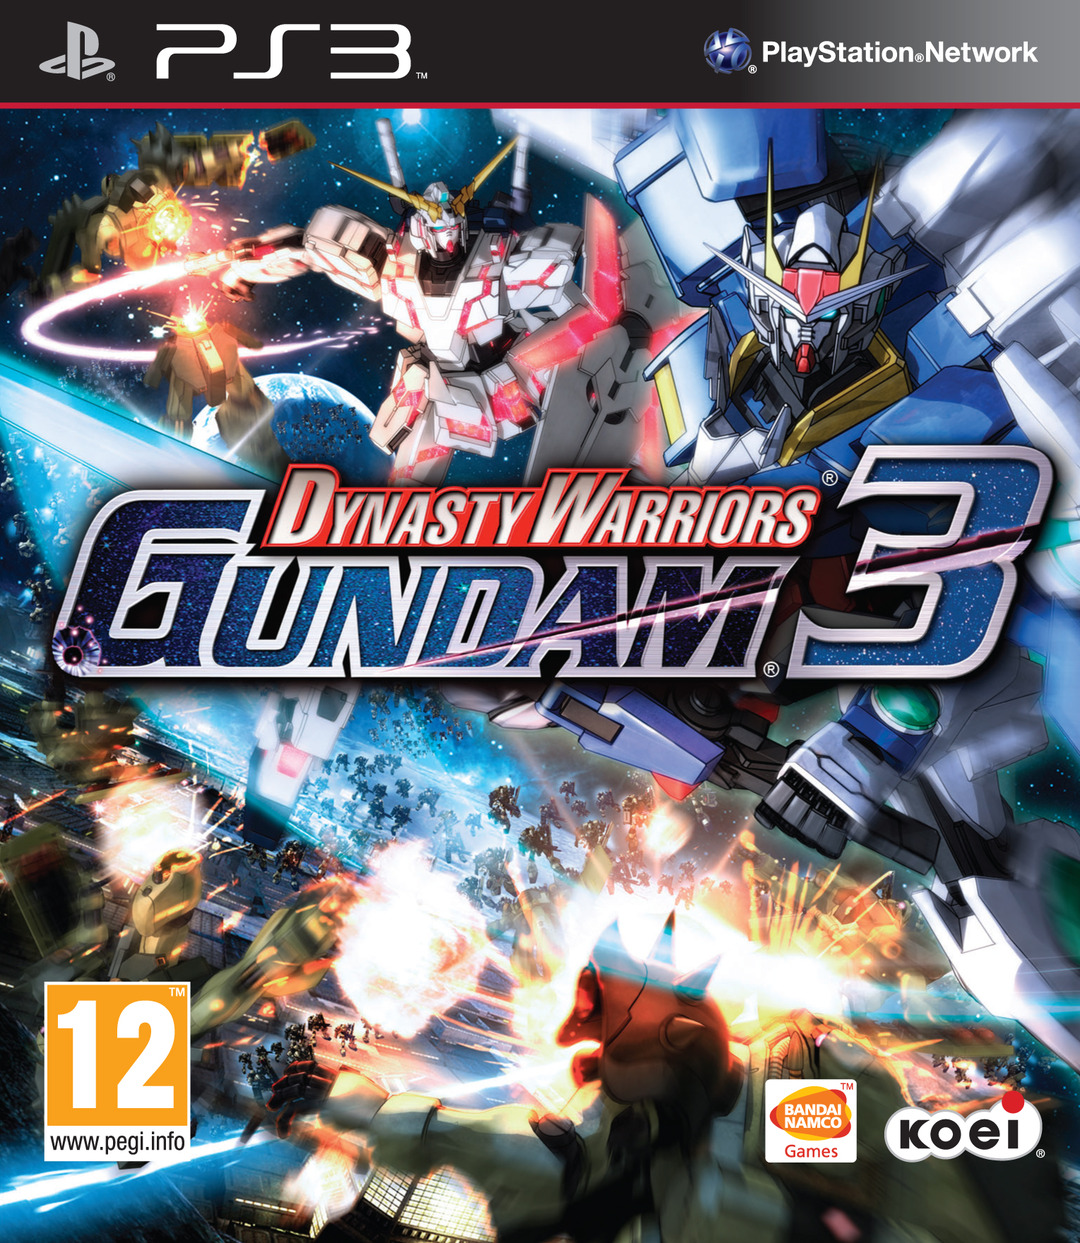 http://image.jeuxvideo.com/images/jaquettes/00038404/jaquette-dynasty-warriors-gundam-3-playstation-3-ps3-cover-avant-g-1307715044.jpg